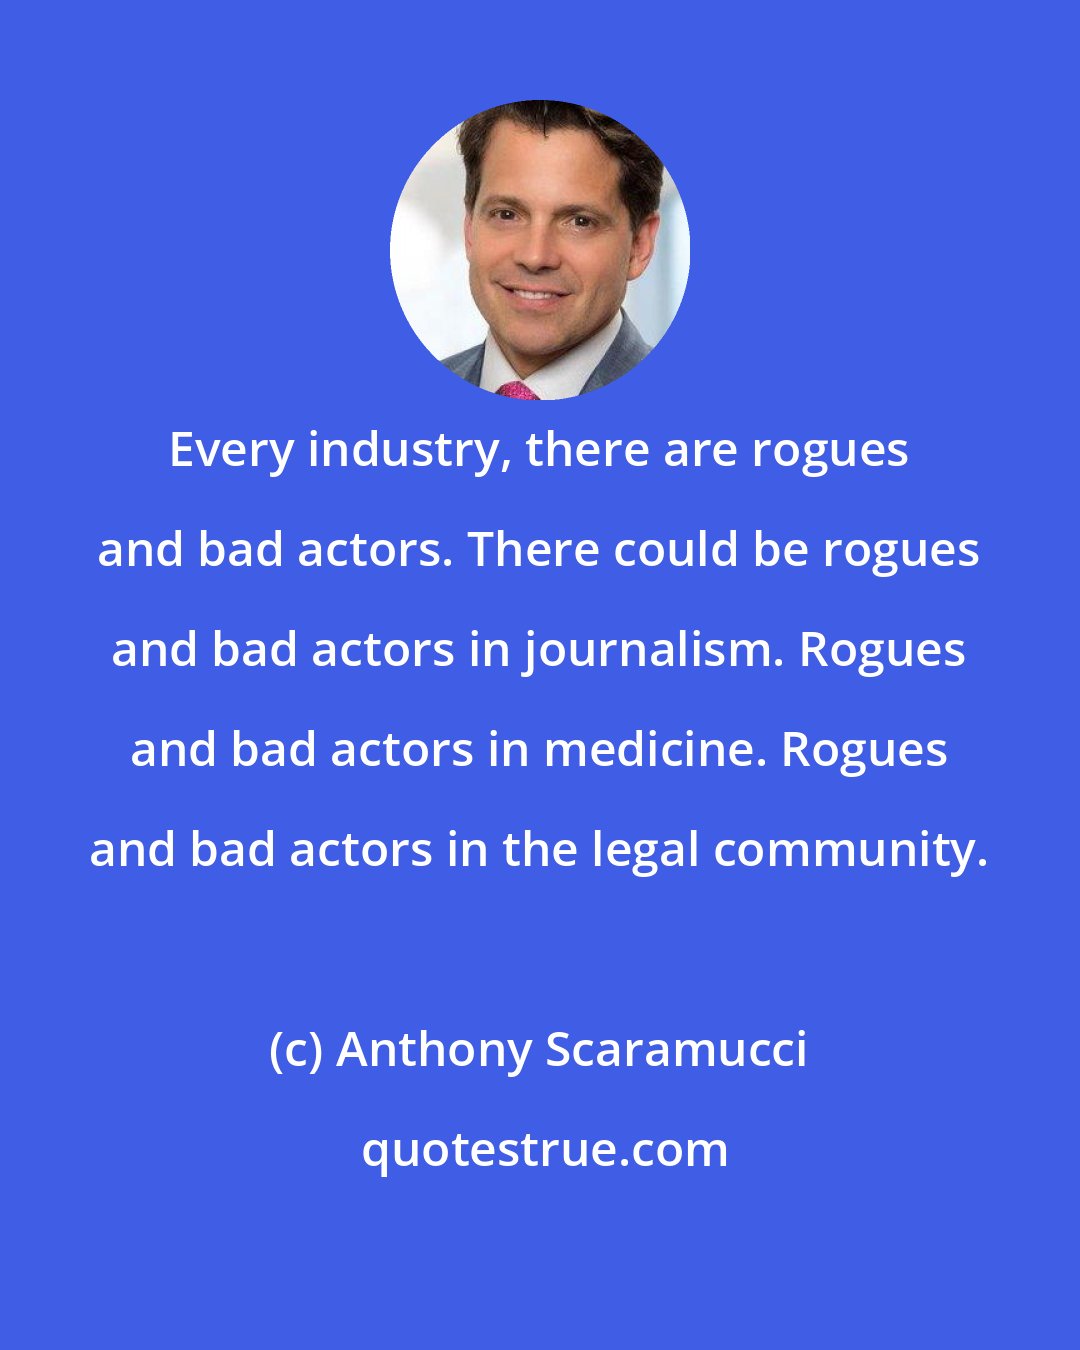 Anthony Scaramucci: Every industry, there are rogues and bad actors. There could be rogues and bad actors in journalism. Rogues and bad actors in medicine. Rogues and bad actors in the legal community.